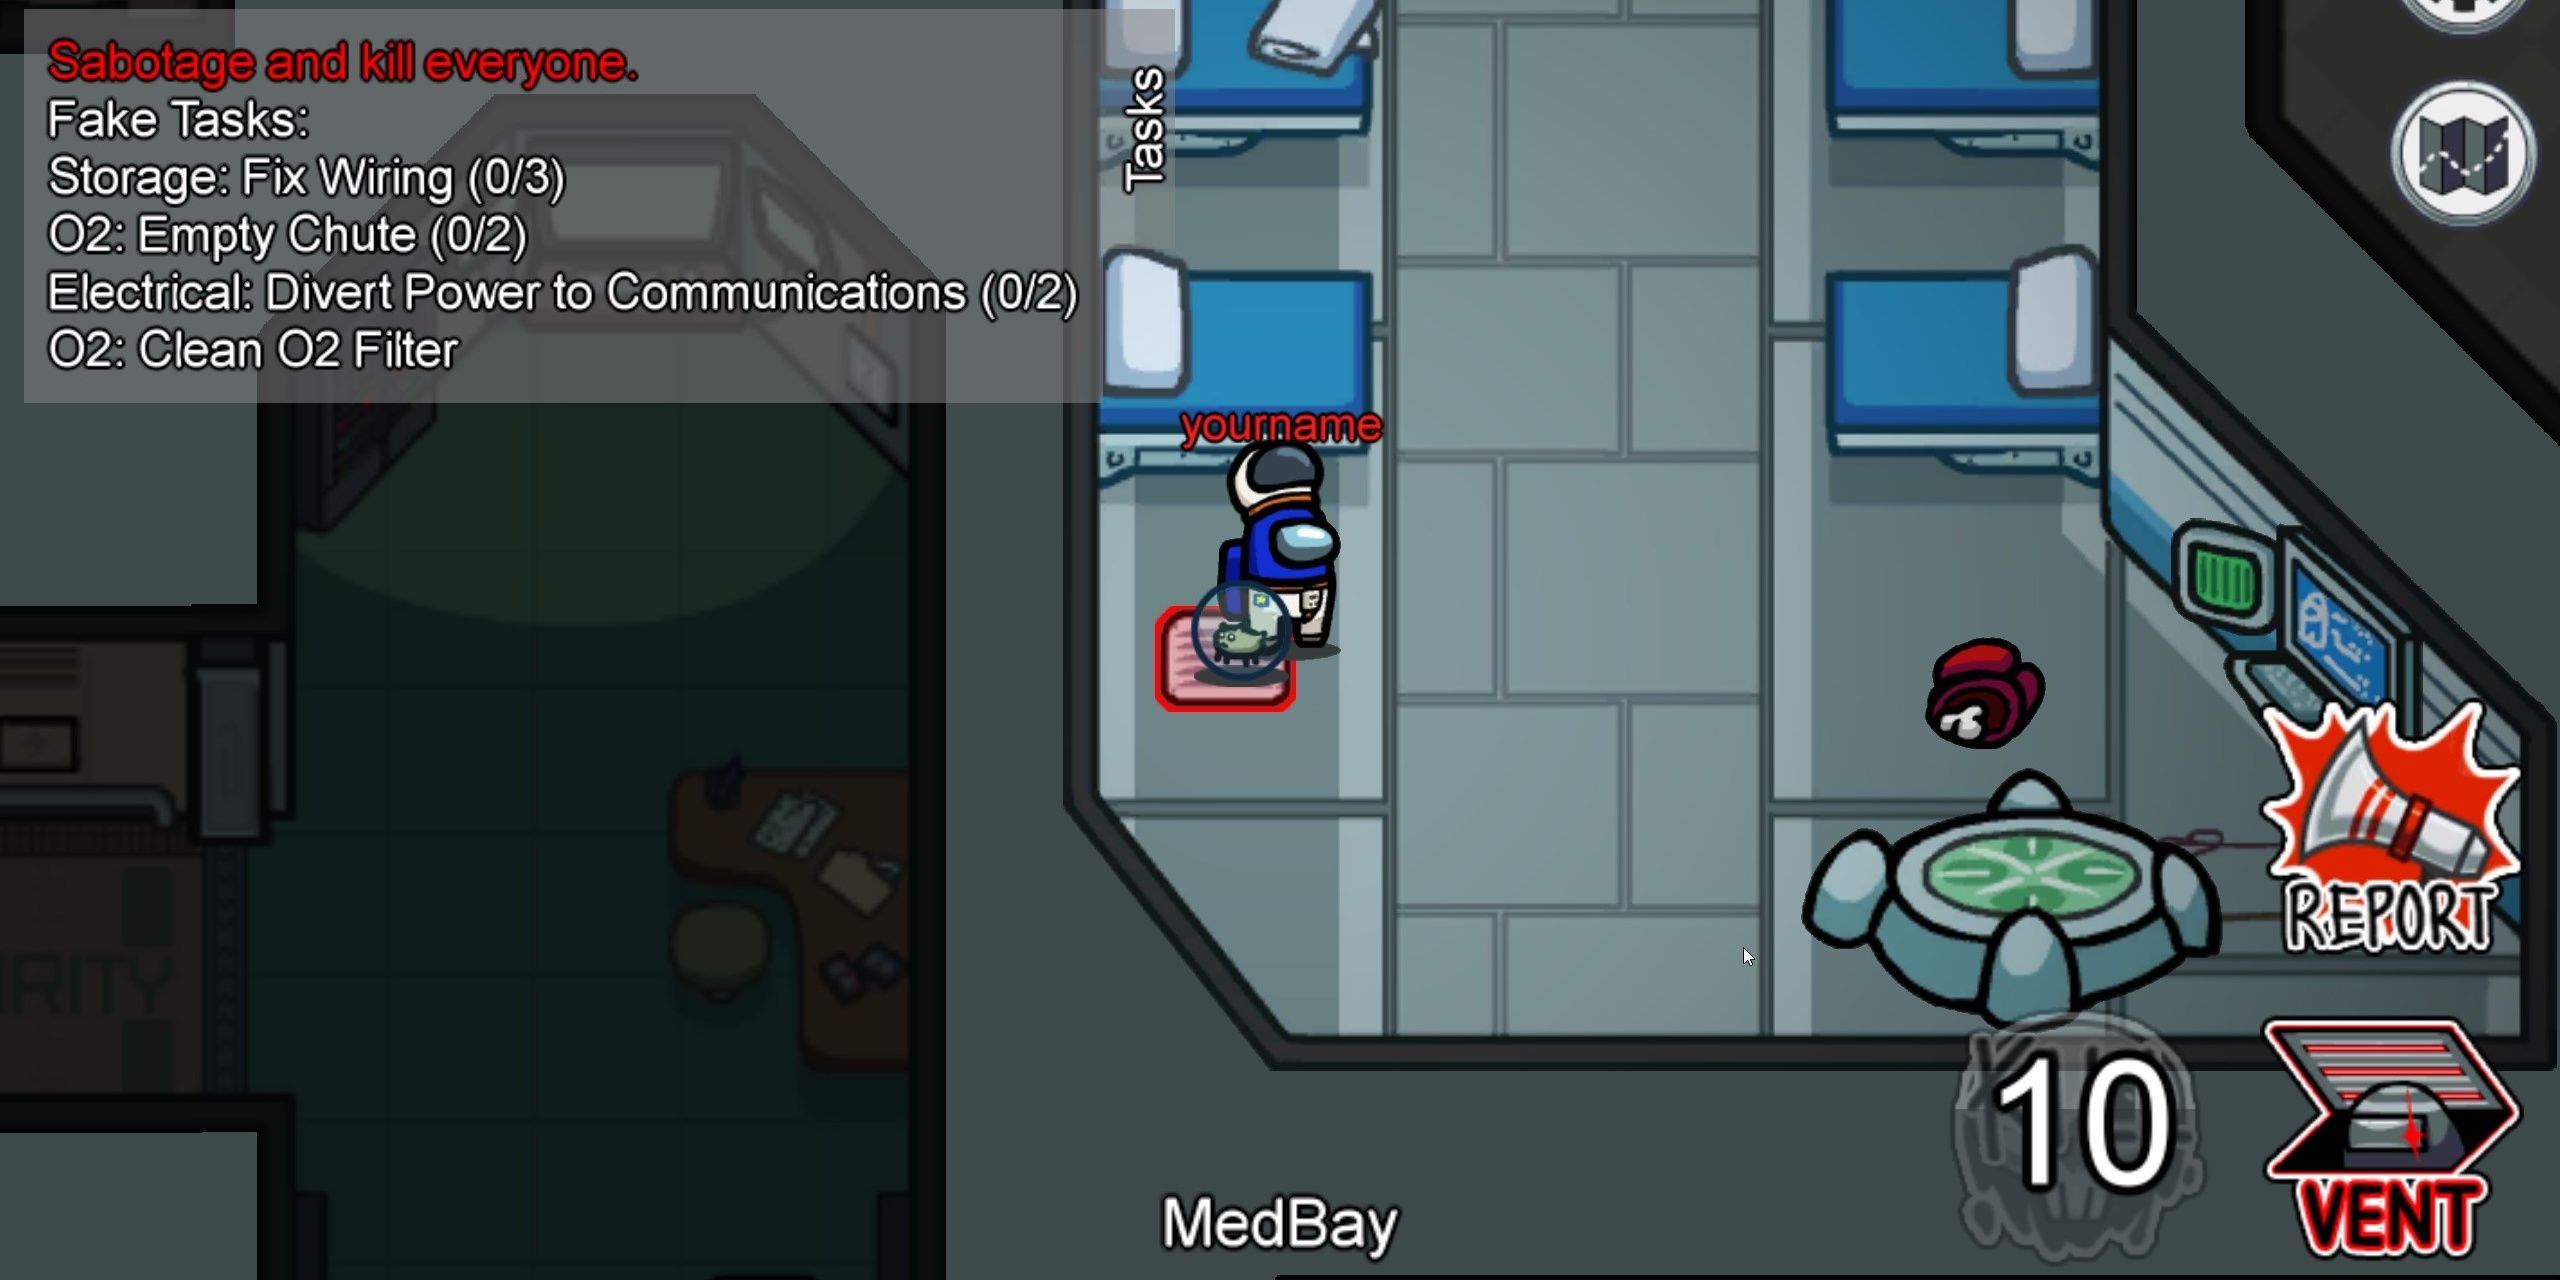 An imposter about to use the MedBay vent in Among Us